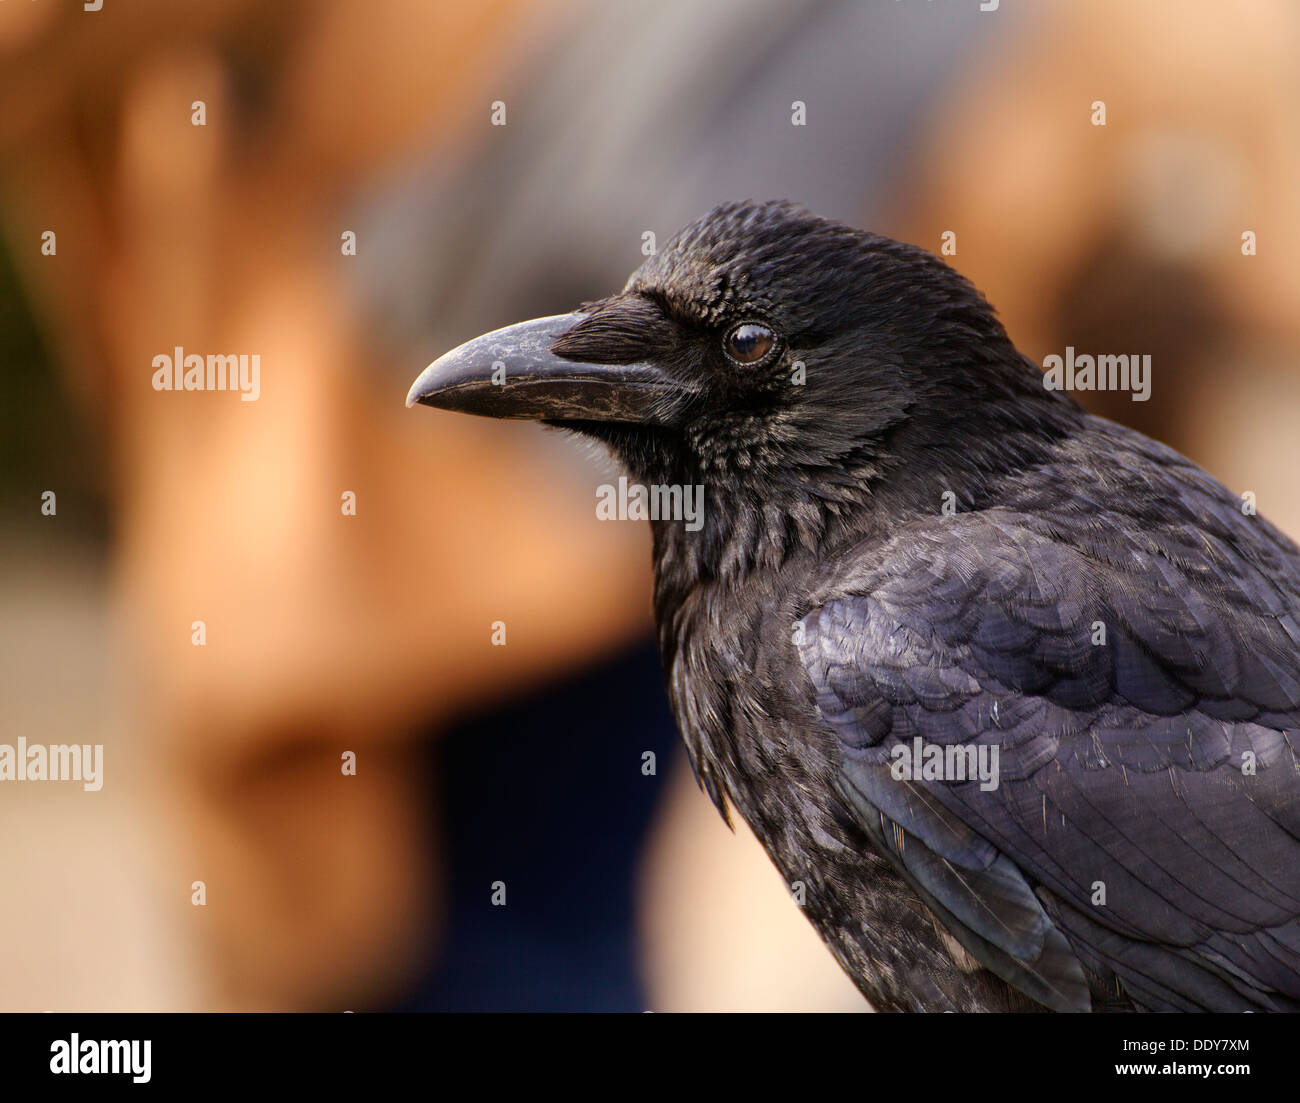 A black carrion crow. Stock Photo